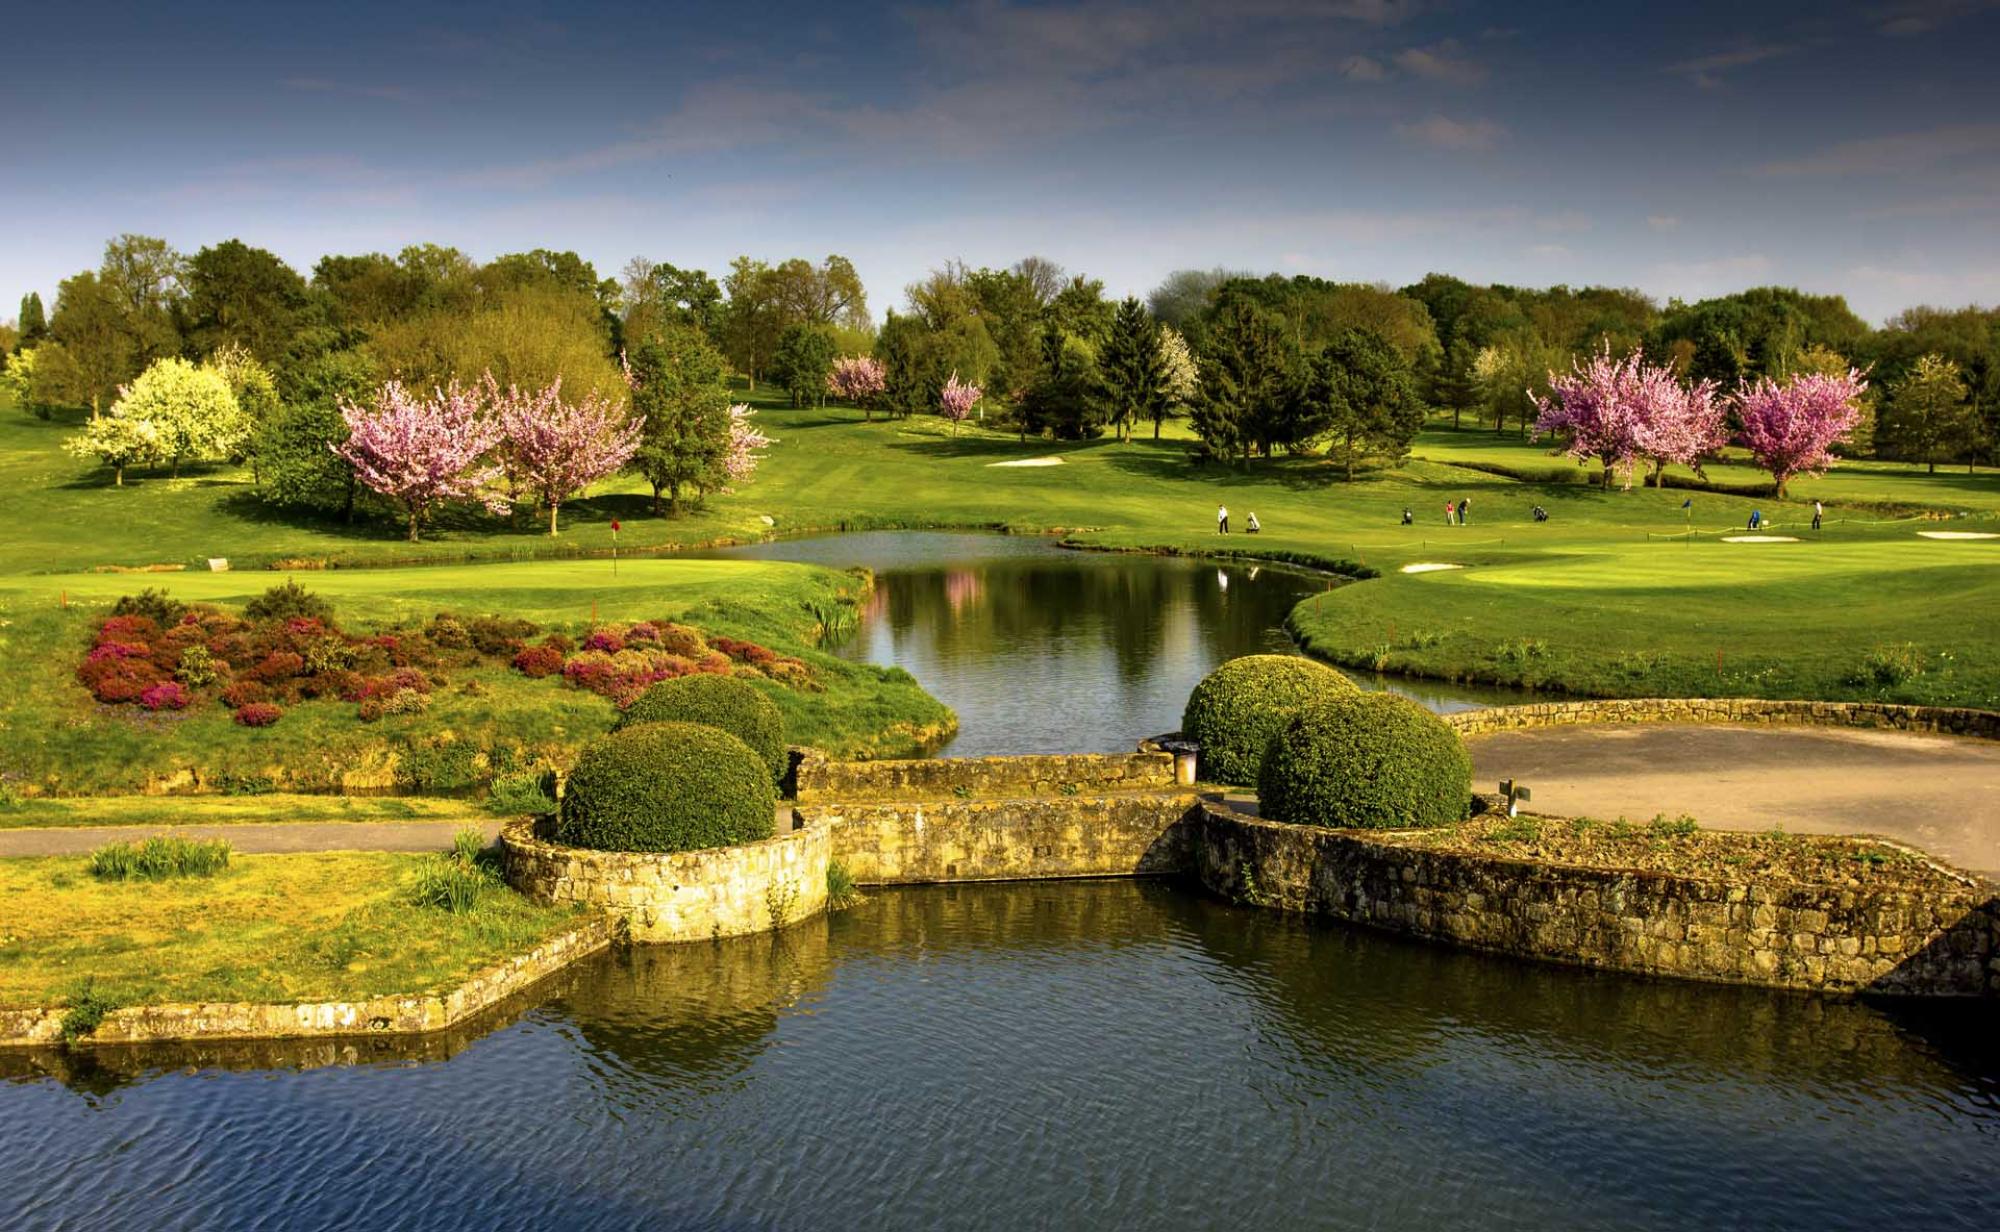 View Cely Golf Club's lovely golf course situated in brilliant Paris.